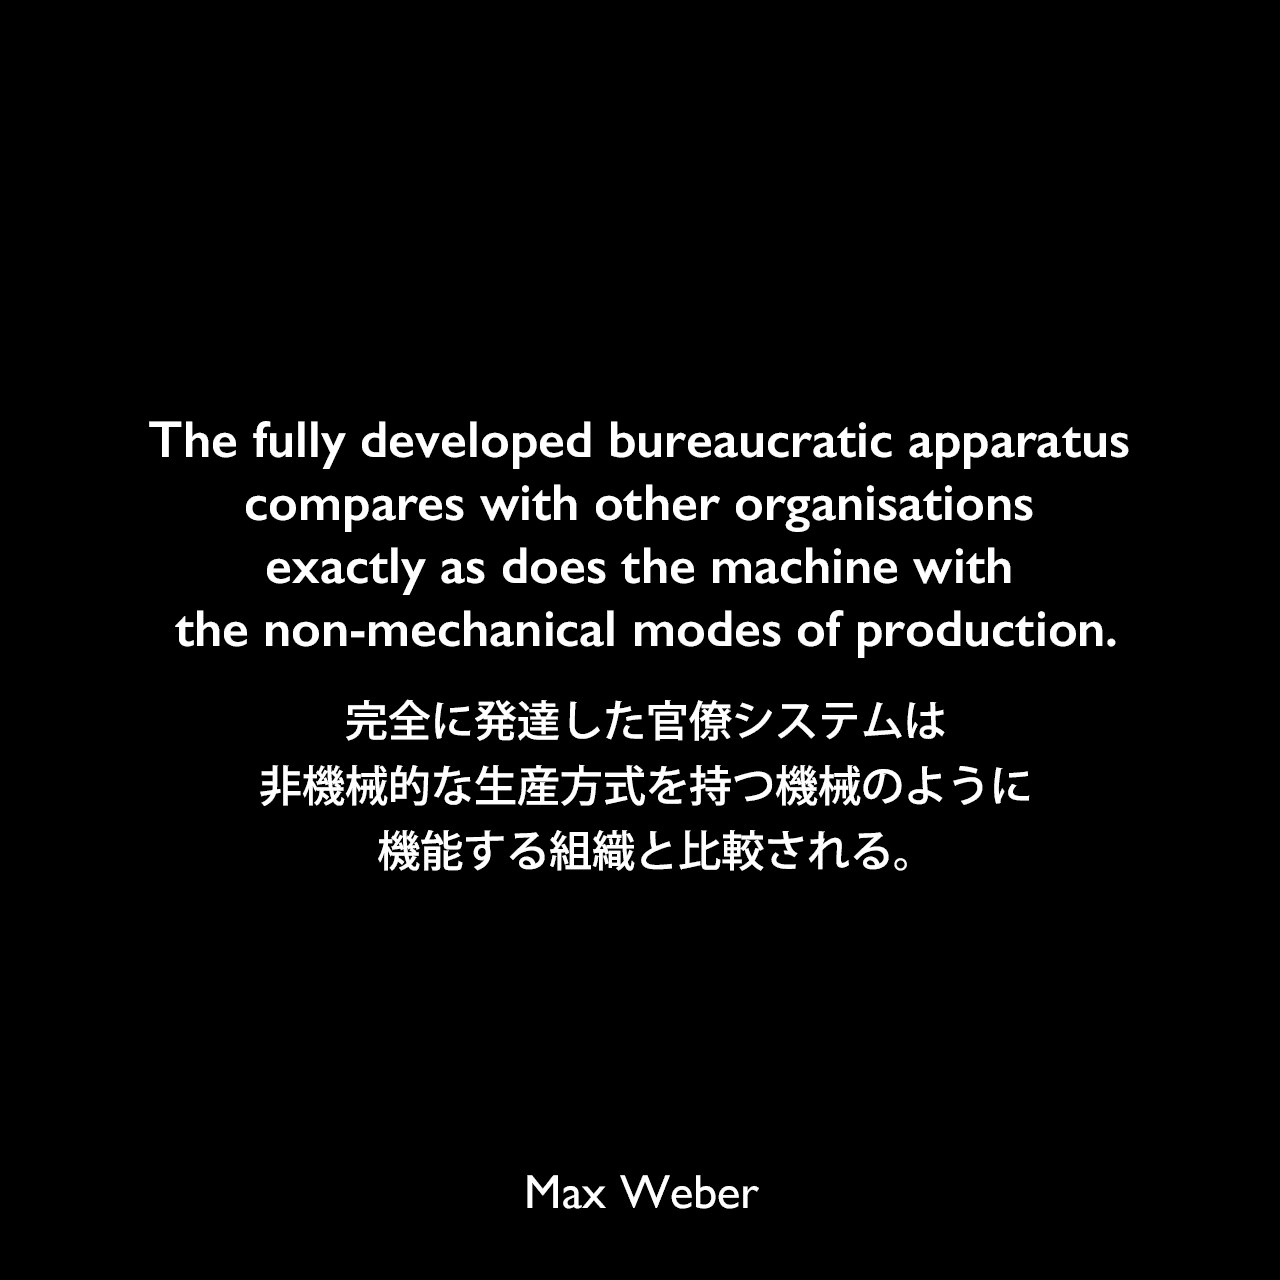 The fully developed bureaucratic apparatus compares with other organisations exactly as does the machine with the non-mechanical modes of production.完全に発達した官僚システムは、非機械的な生産方式を持つ機械のように機能する組織と比較される。Max Weber